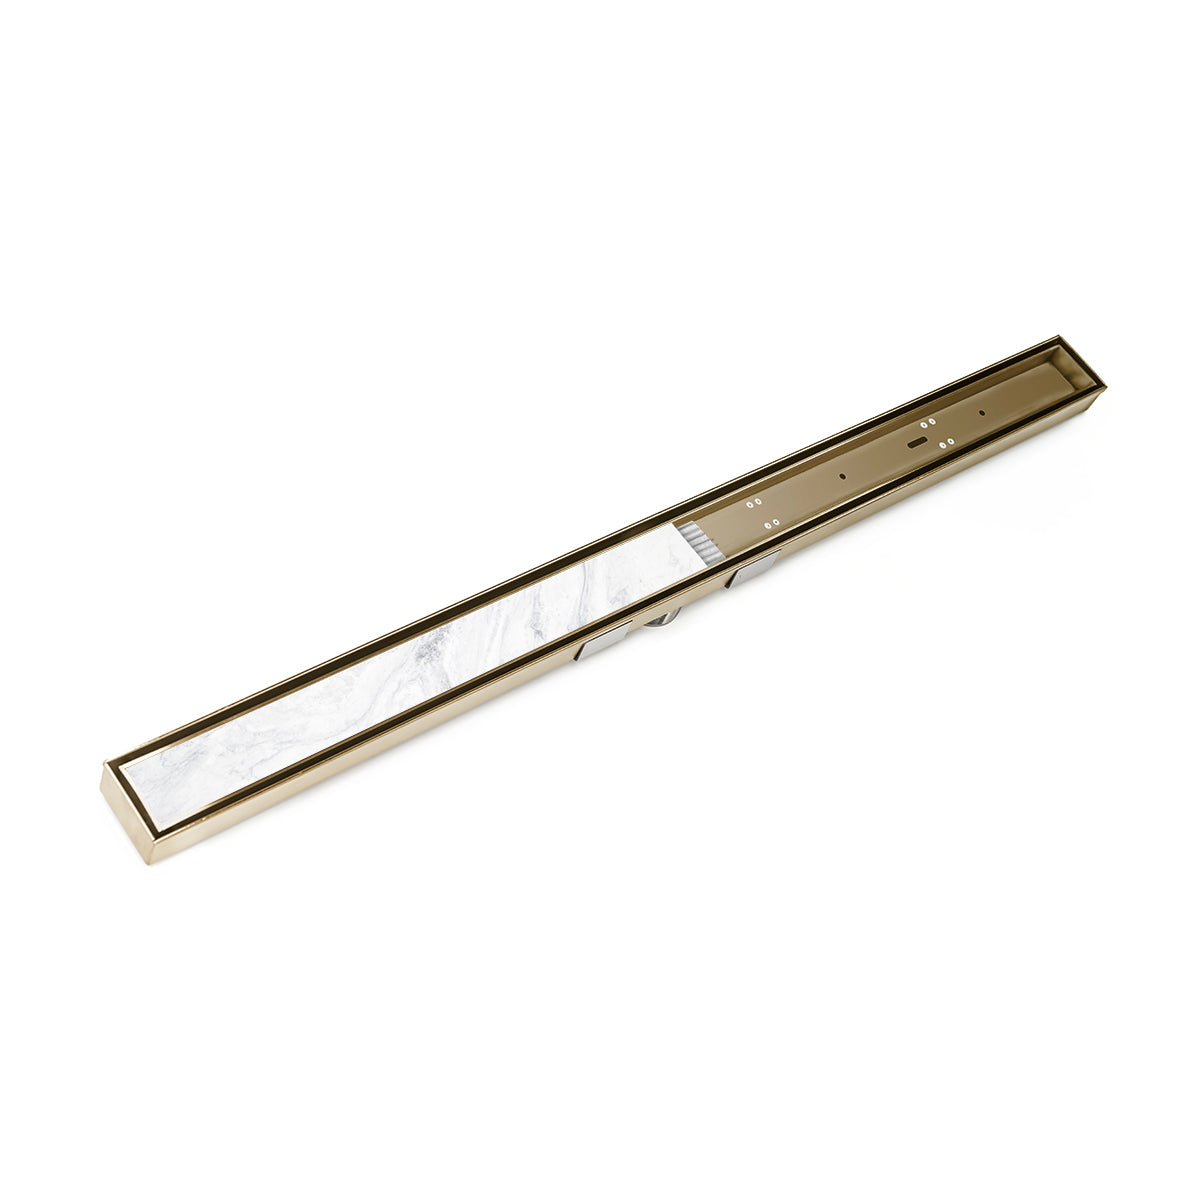 Infinity Drain 48" S-Stainless Steel Series Site Sizable Linear Drain Kit with Tile Insert Frame